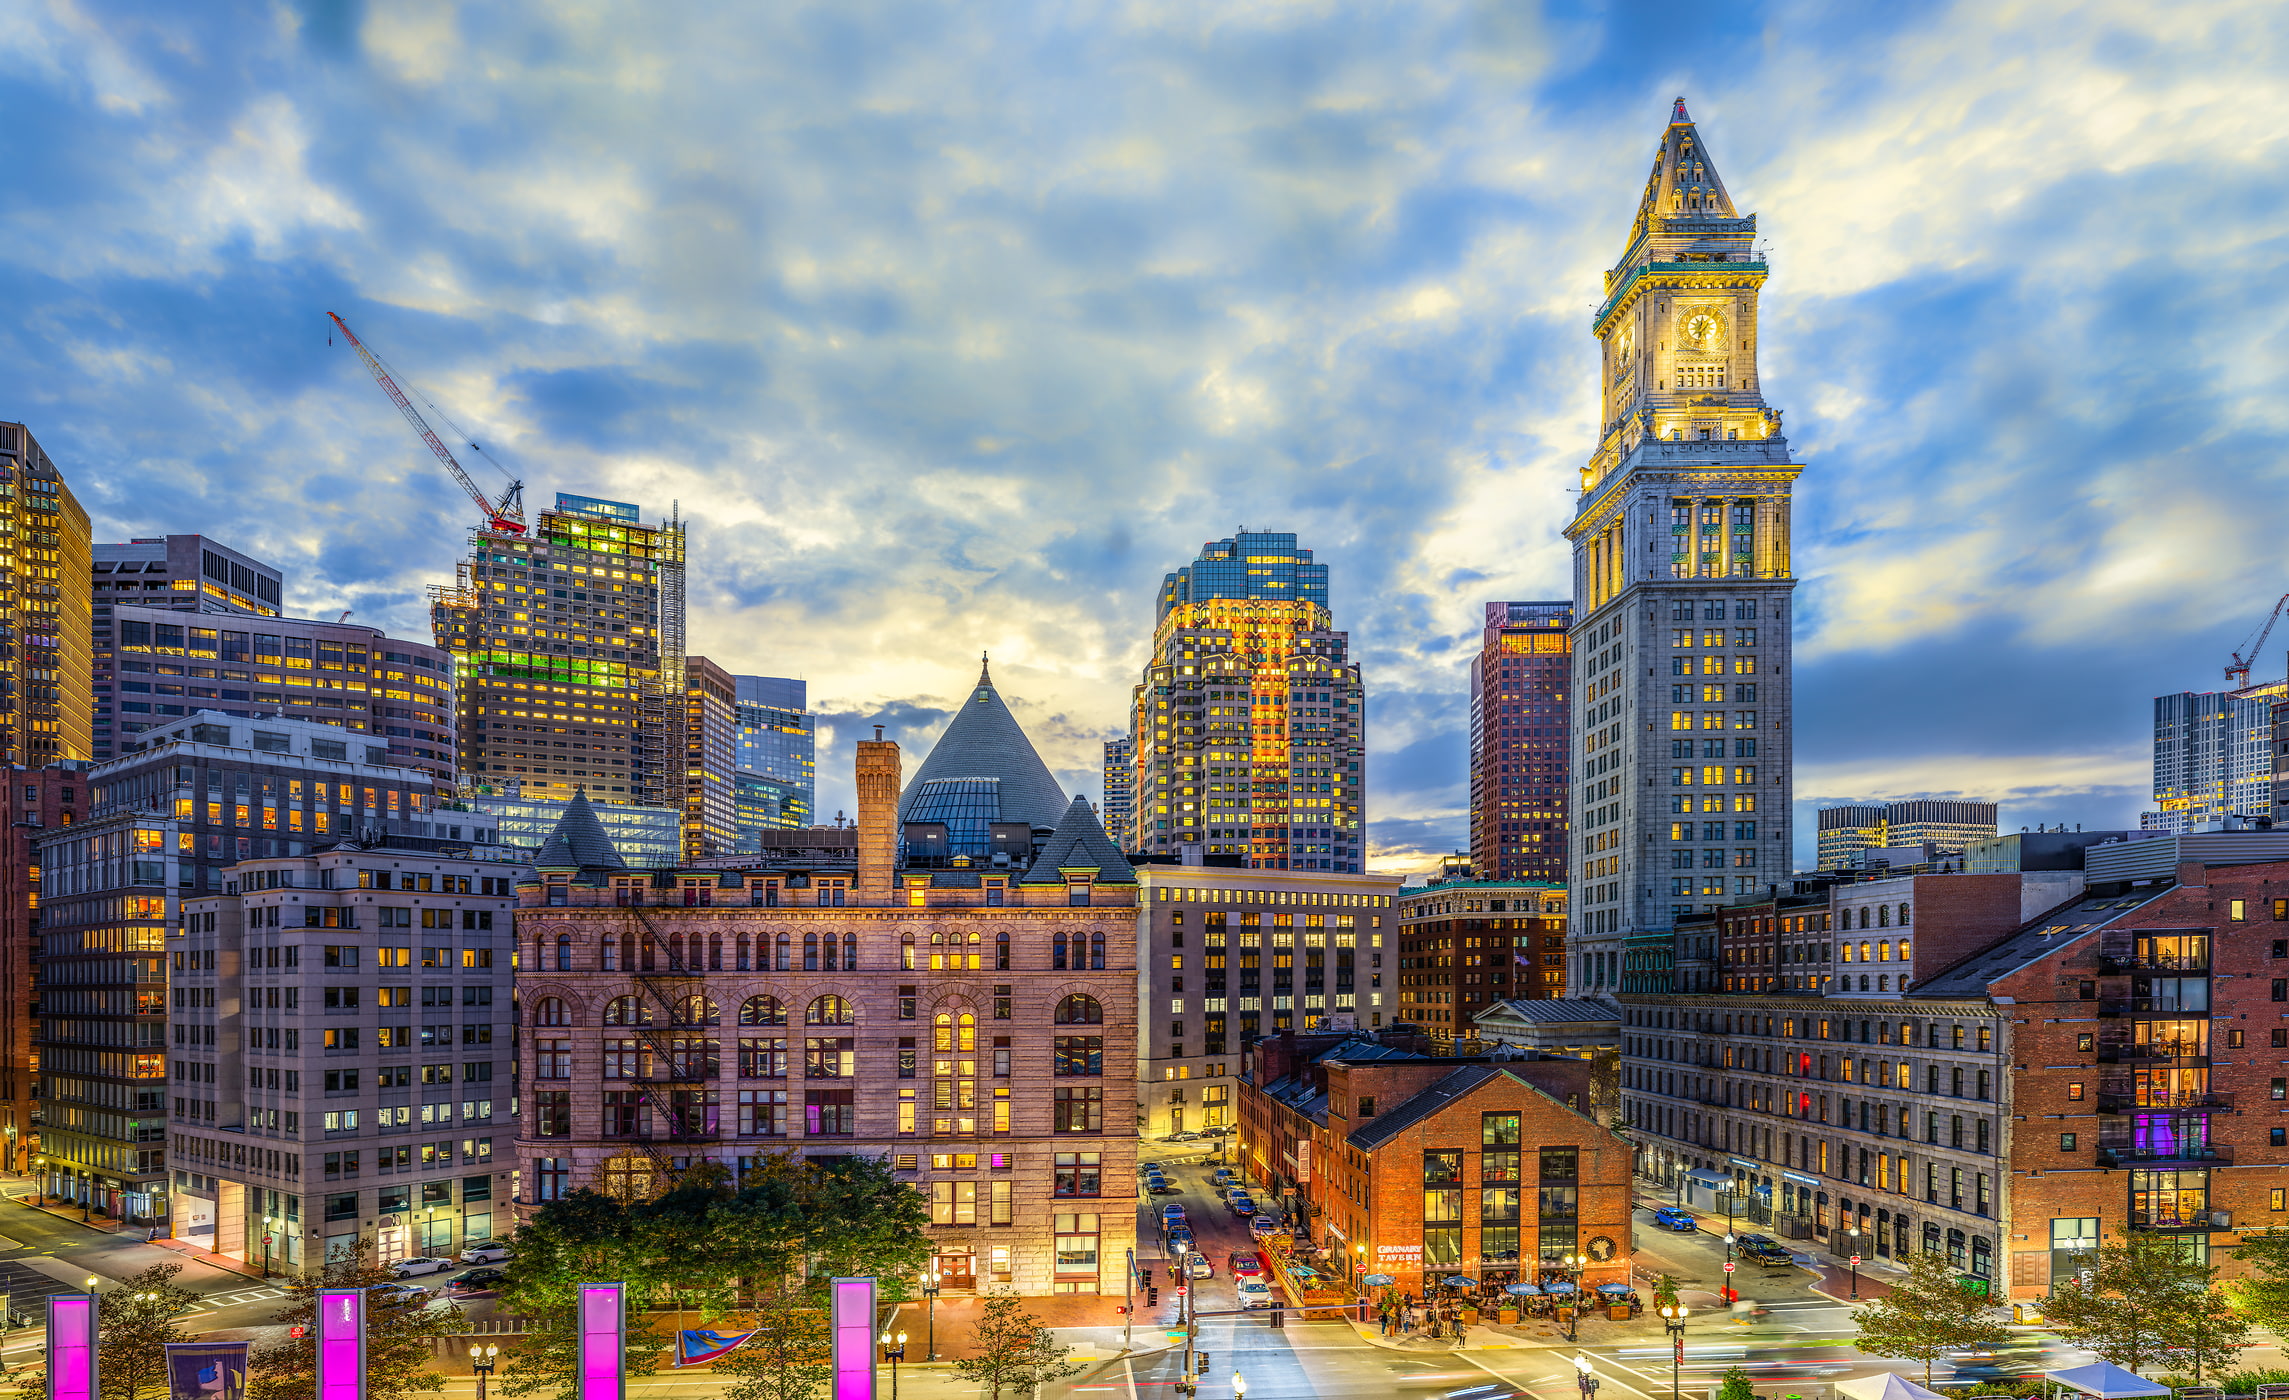 2,916 megapixels! A very high resolution, large-format VAST photo print of the Custom House in Boston; photograph created by Chris Blake in Boston, Massachusetts